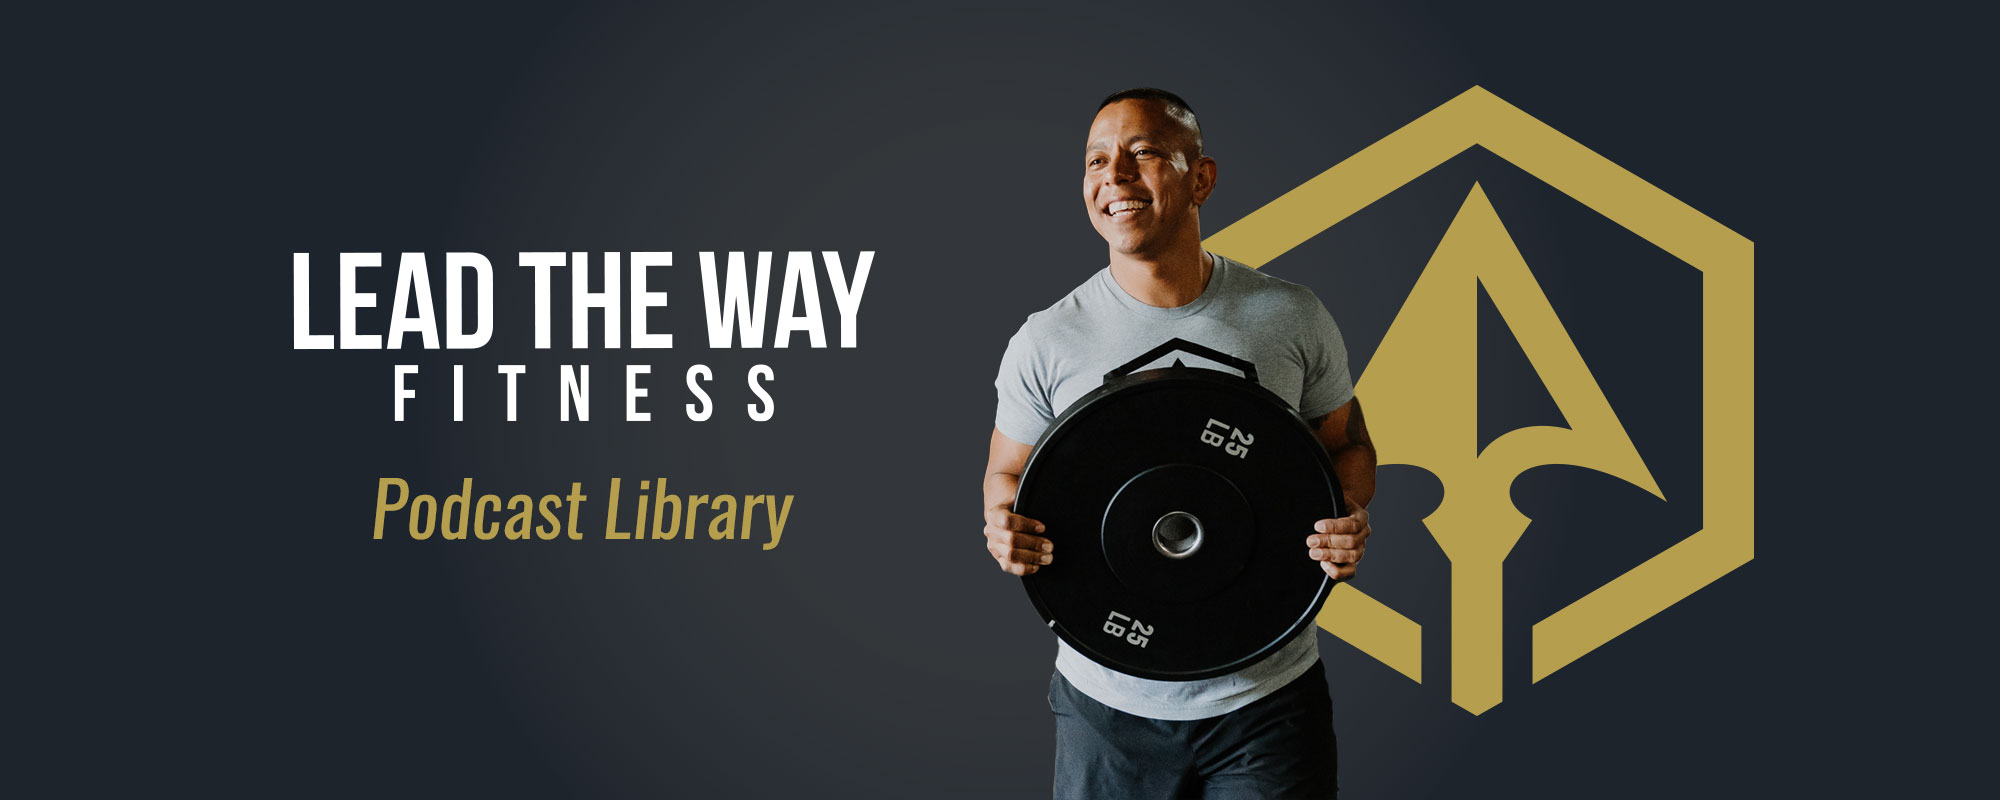 Lead the Way Fitness - Podcast Library